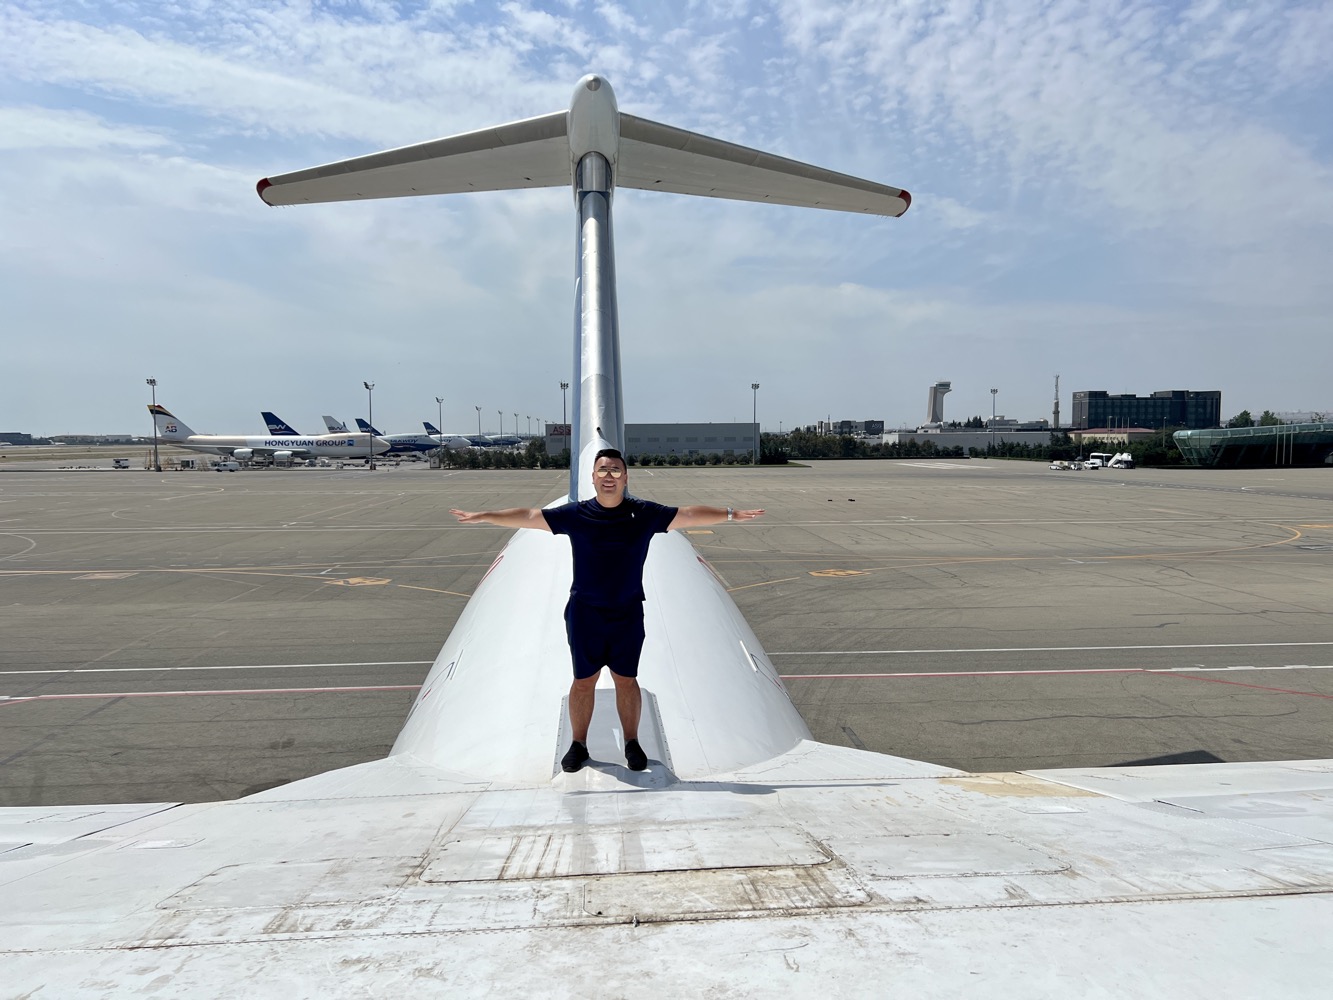 a man standing on the wing of an airplane